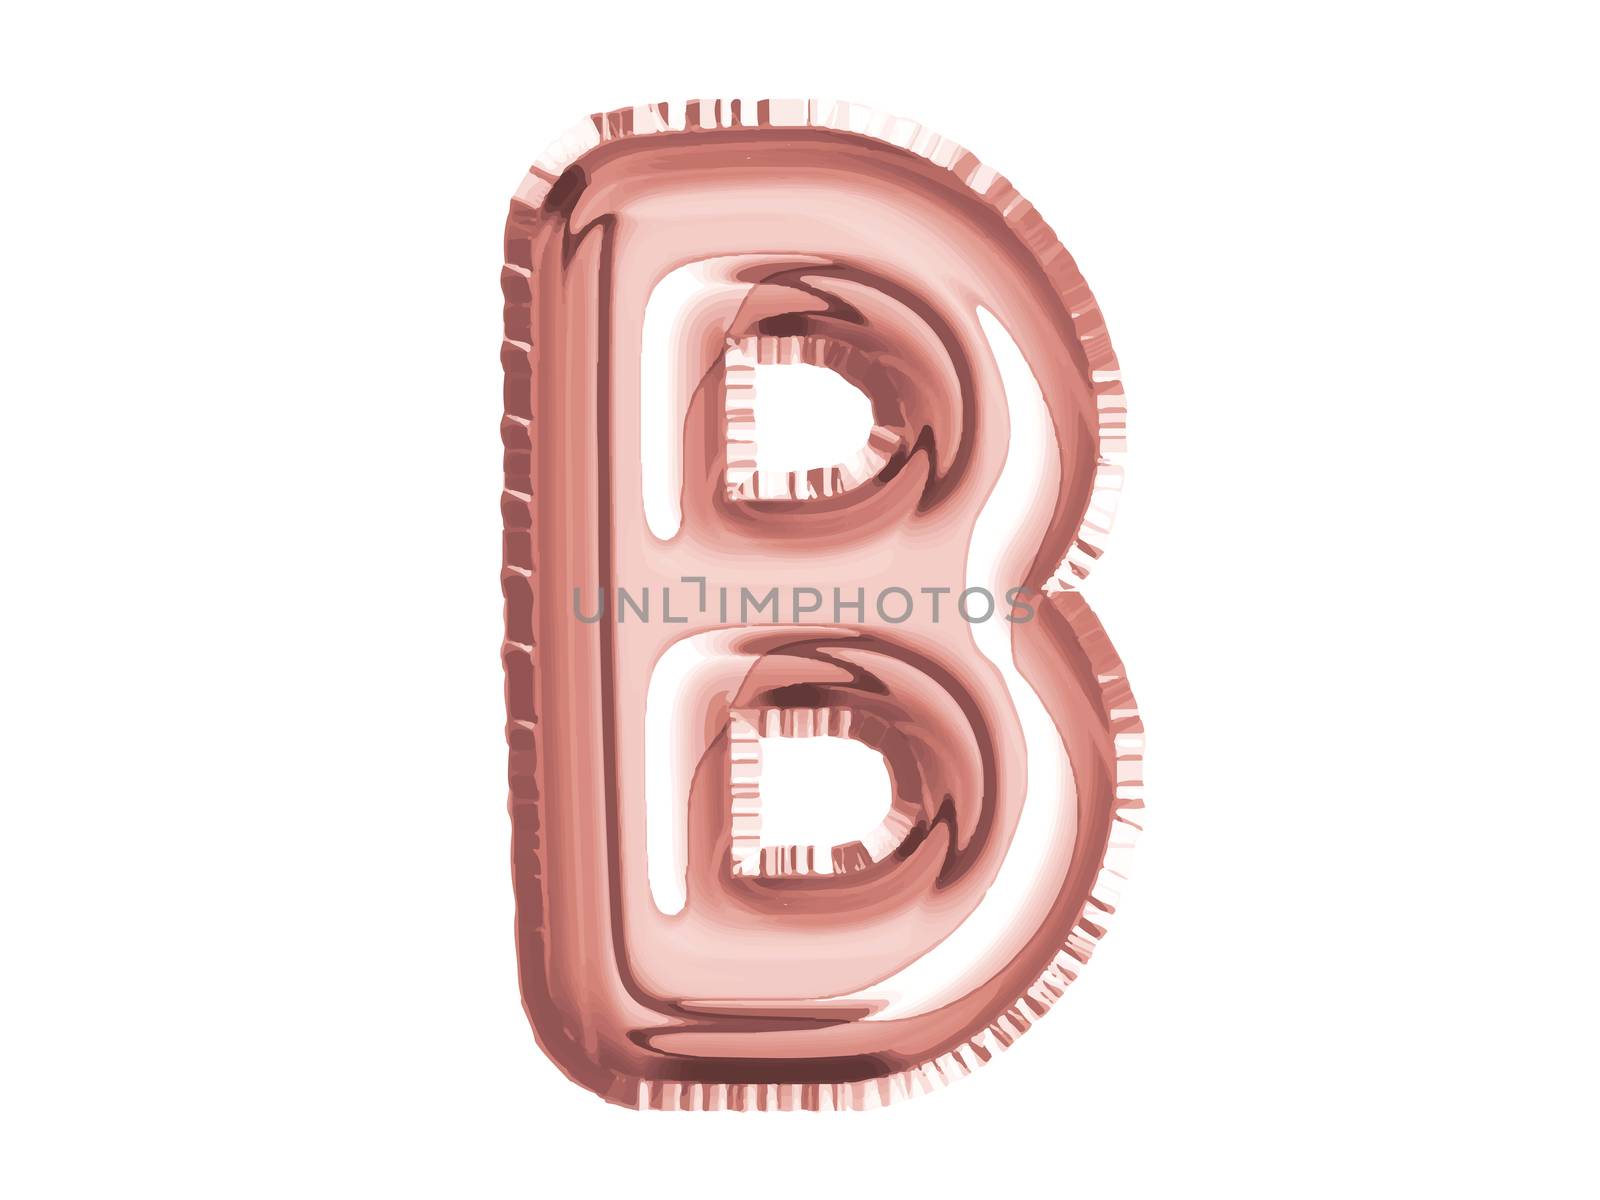 The rose gold pink alphabet B air balloon decoration for baby shower birthday celebrate party